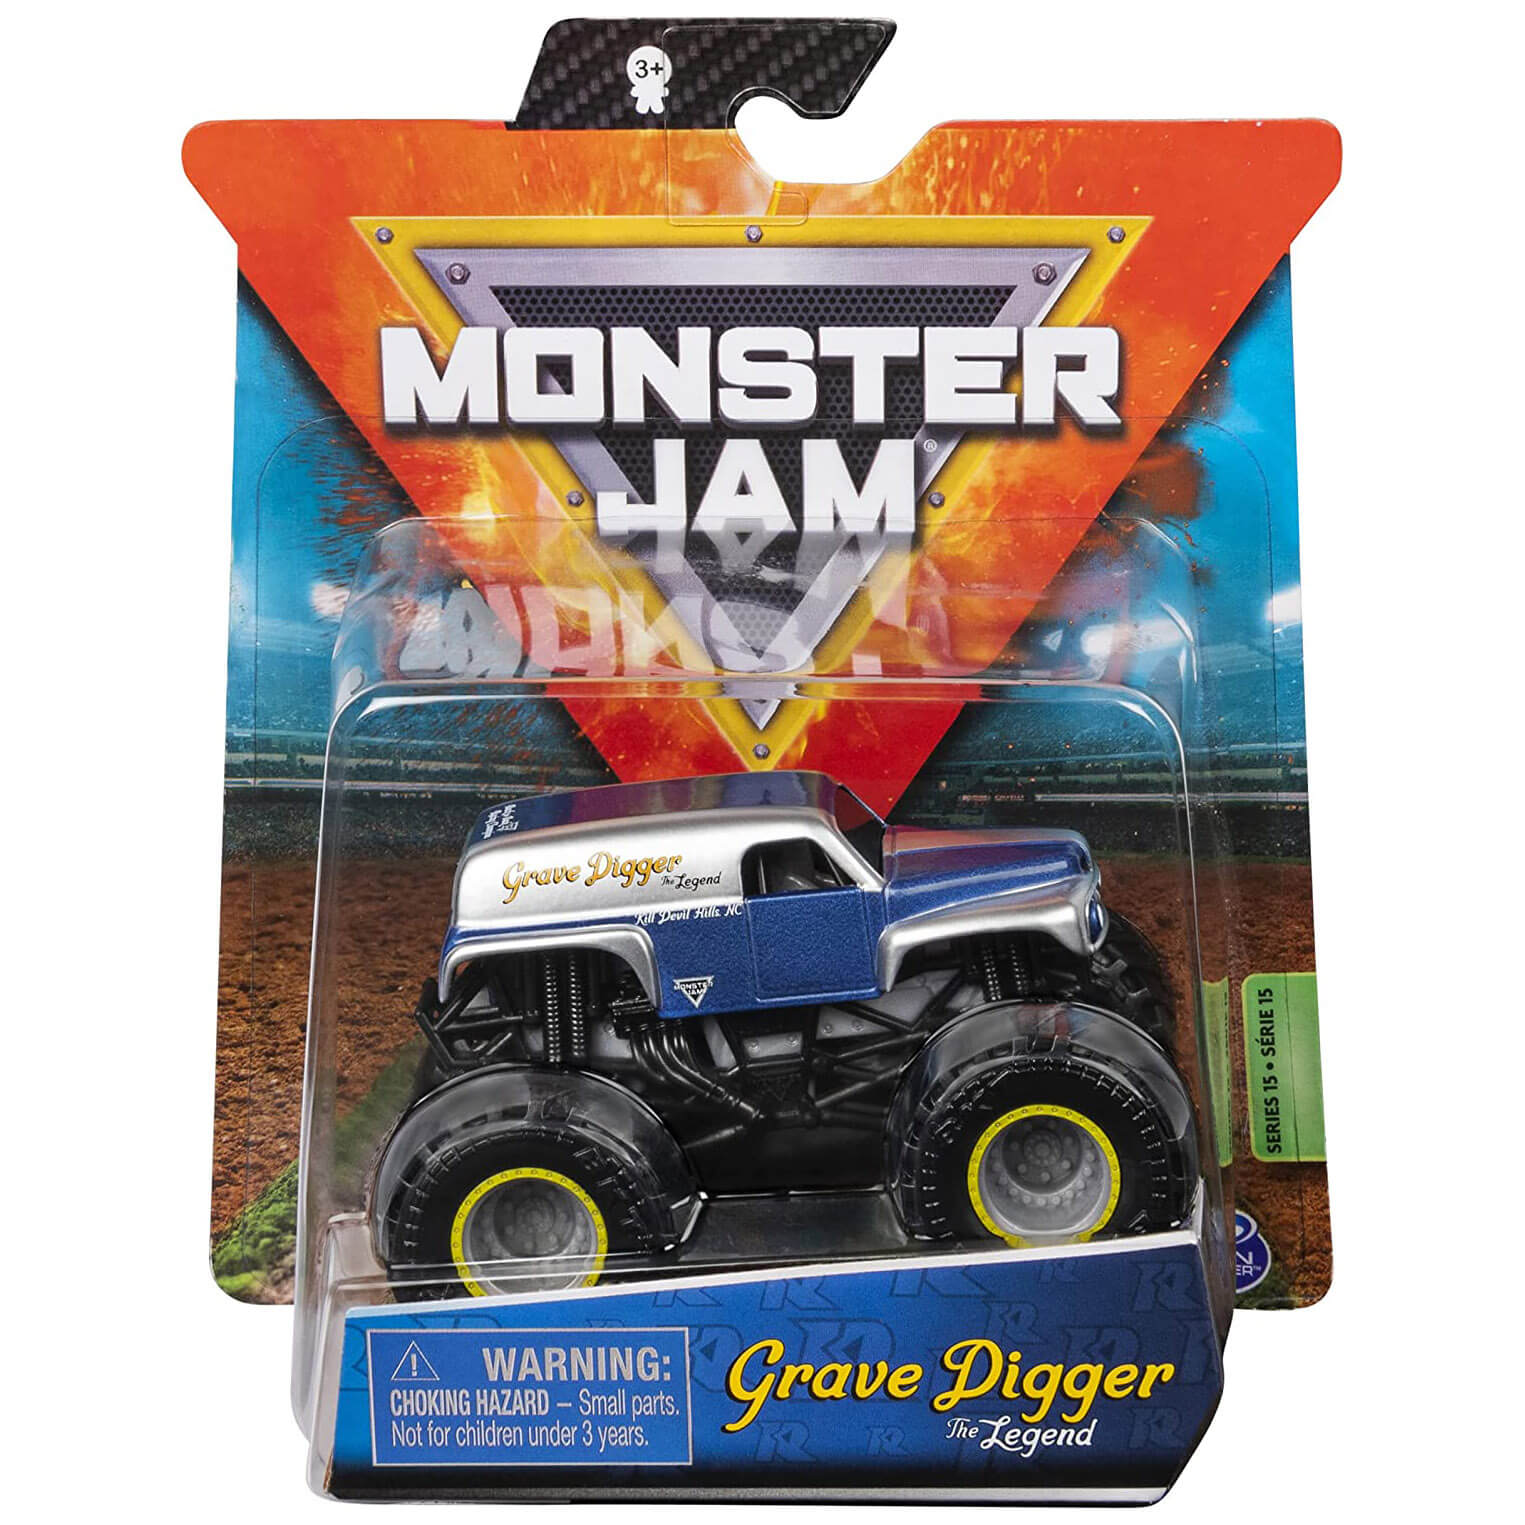 Monster Jam Grave Digger the Legend 1:64 Scale Diecast Vehicle